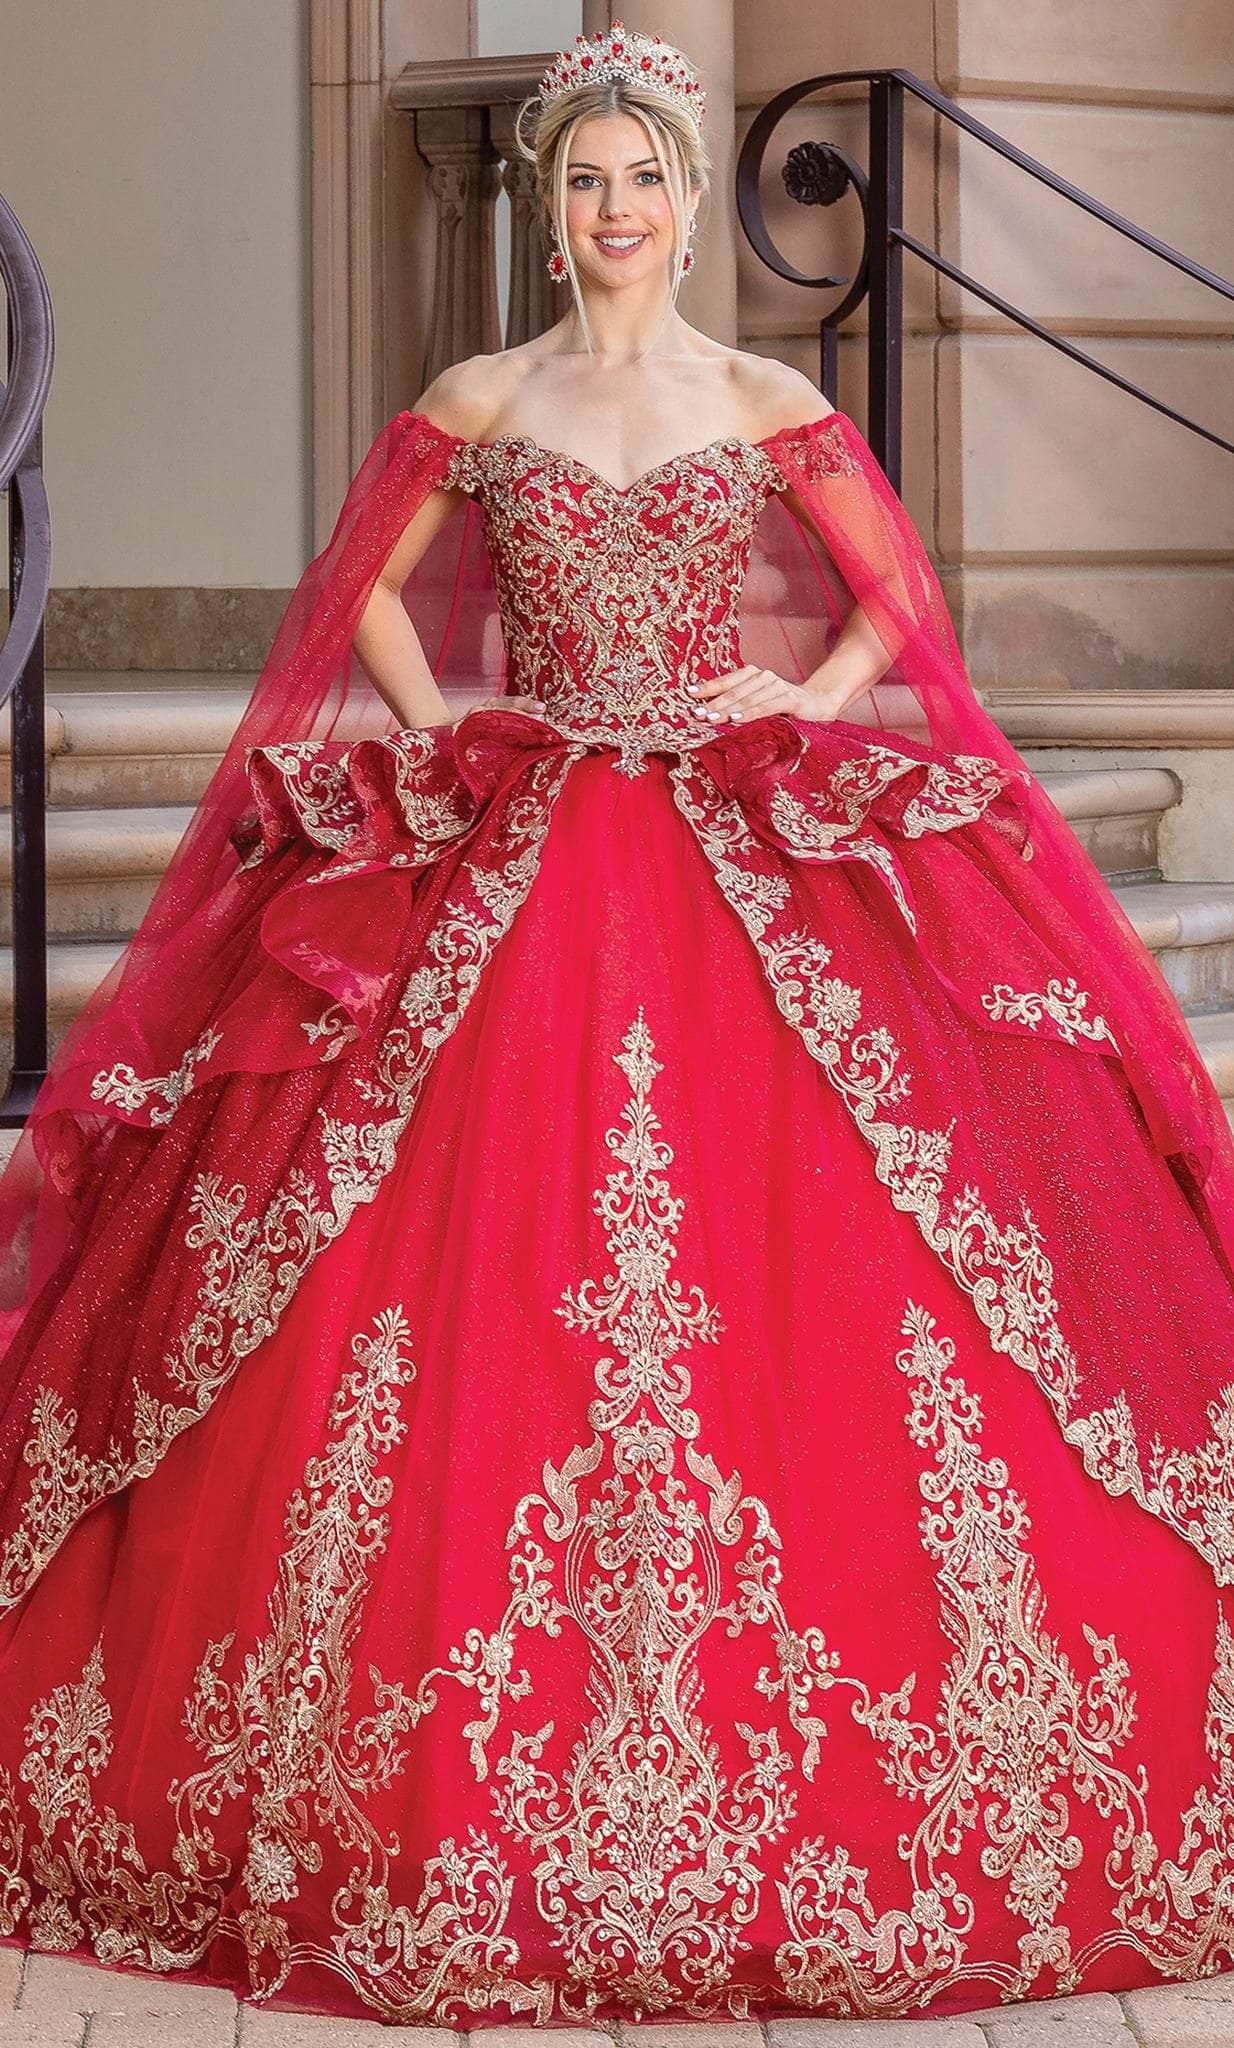 Dancing Queen 1720 - Tiered Ballgown with Cape
